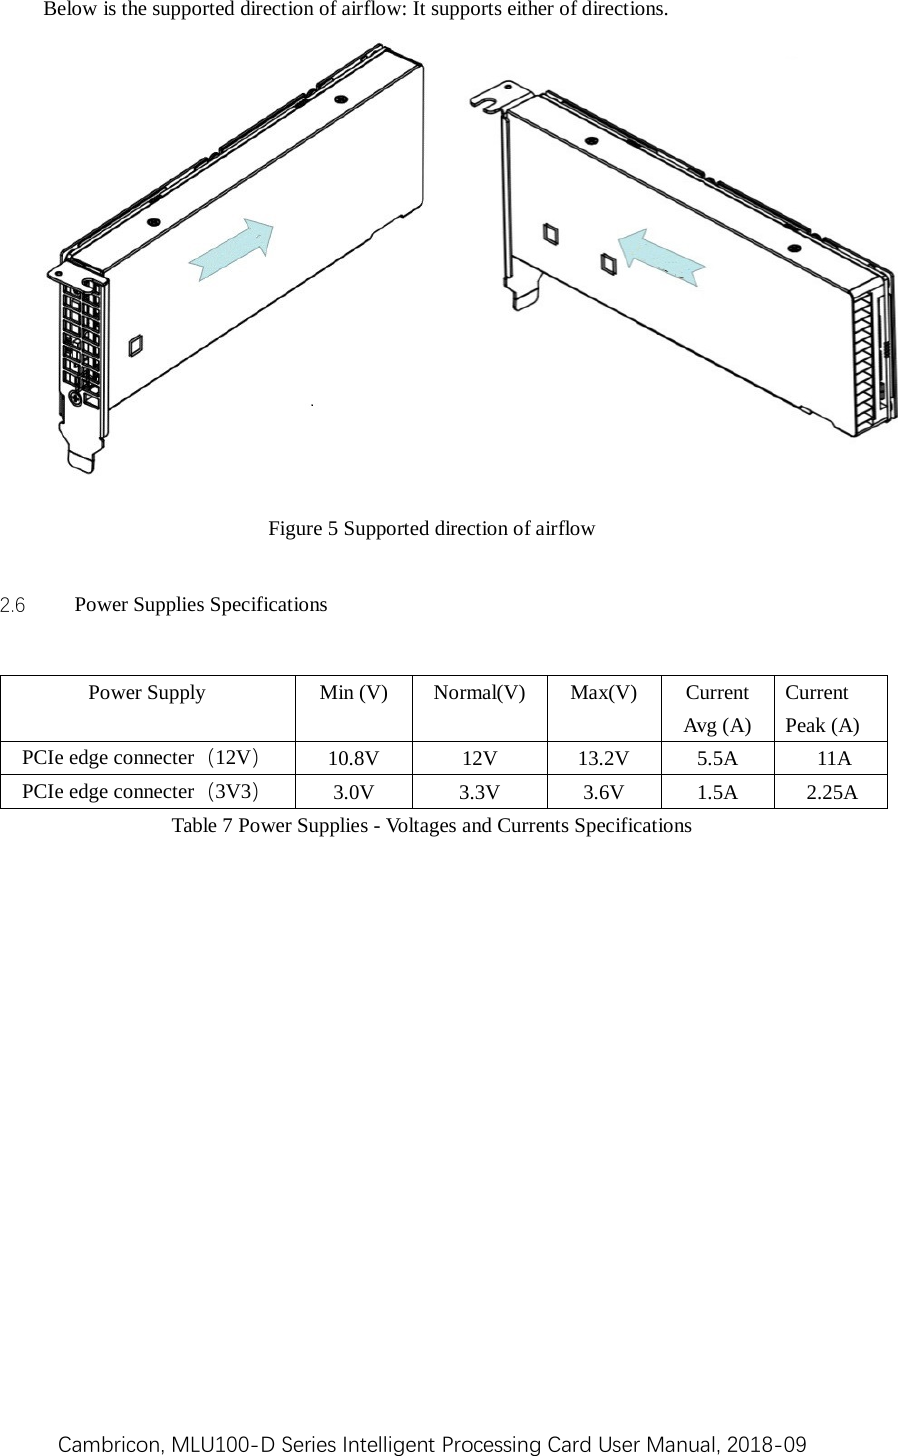 Cambricon, MLU100-D Series Intelligent Processing Card User Manual, 2018-09  Below is the supported direction of airflow: It supports either of directions.    Figure 5 Supported direction of airflow   2.6 Power Supplies Specifications  Power Supply  Min (V)  Normal(V)  Max(V)  Current Avg (A) Current Peak (A) PCIe edge connecter（12V） 10.8V  12V  13.2V  5.5A     11A PCIe edge connecter（3V3） 3.0V  3.3V  3.6V  1.5A    2.25A   Table 7 Power Supplies - Voltages and Currents Specifications    